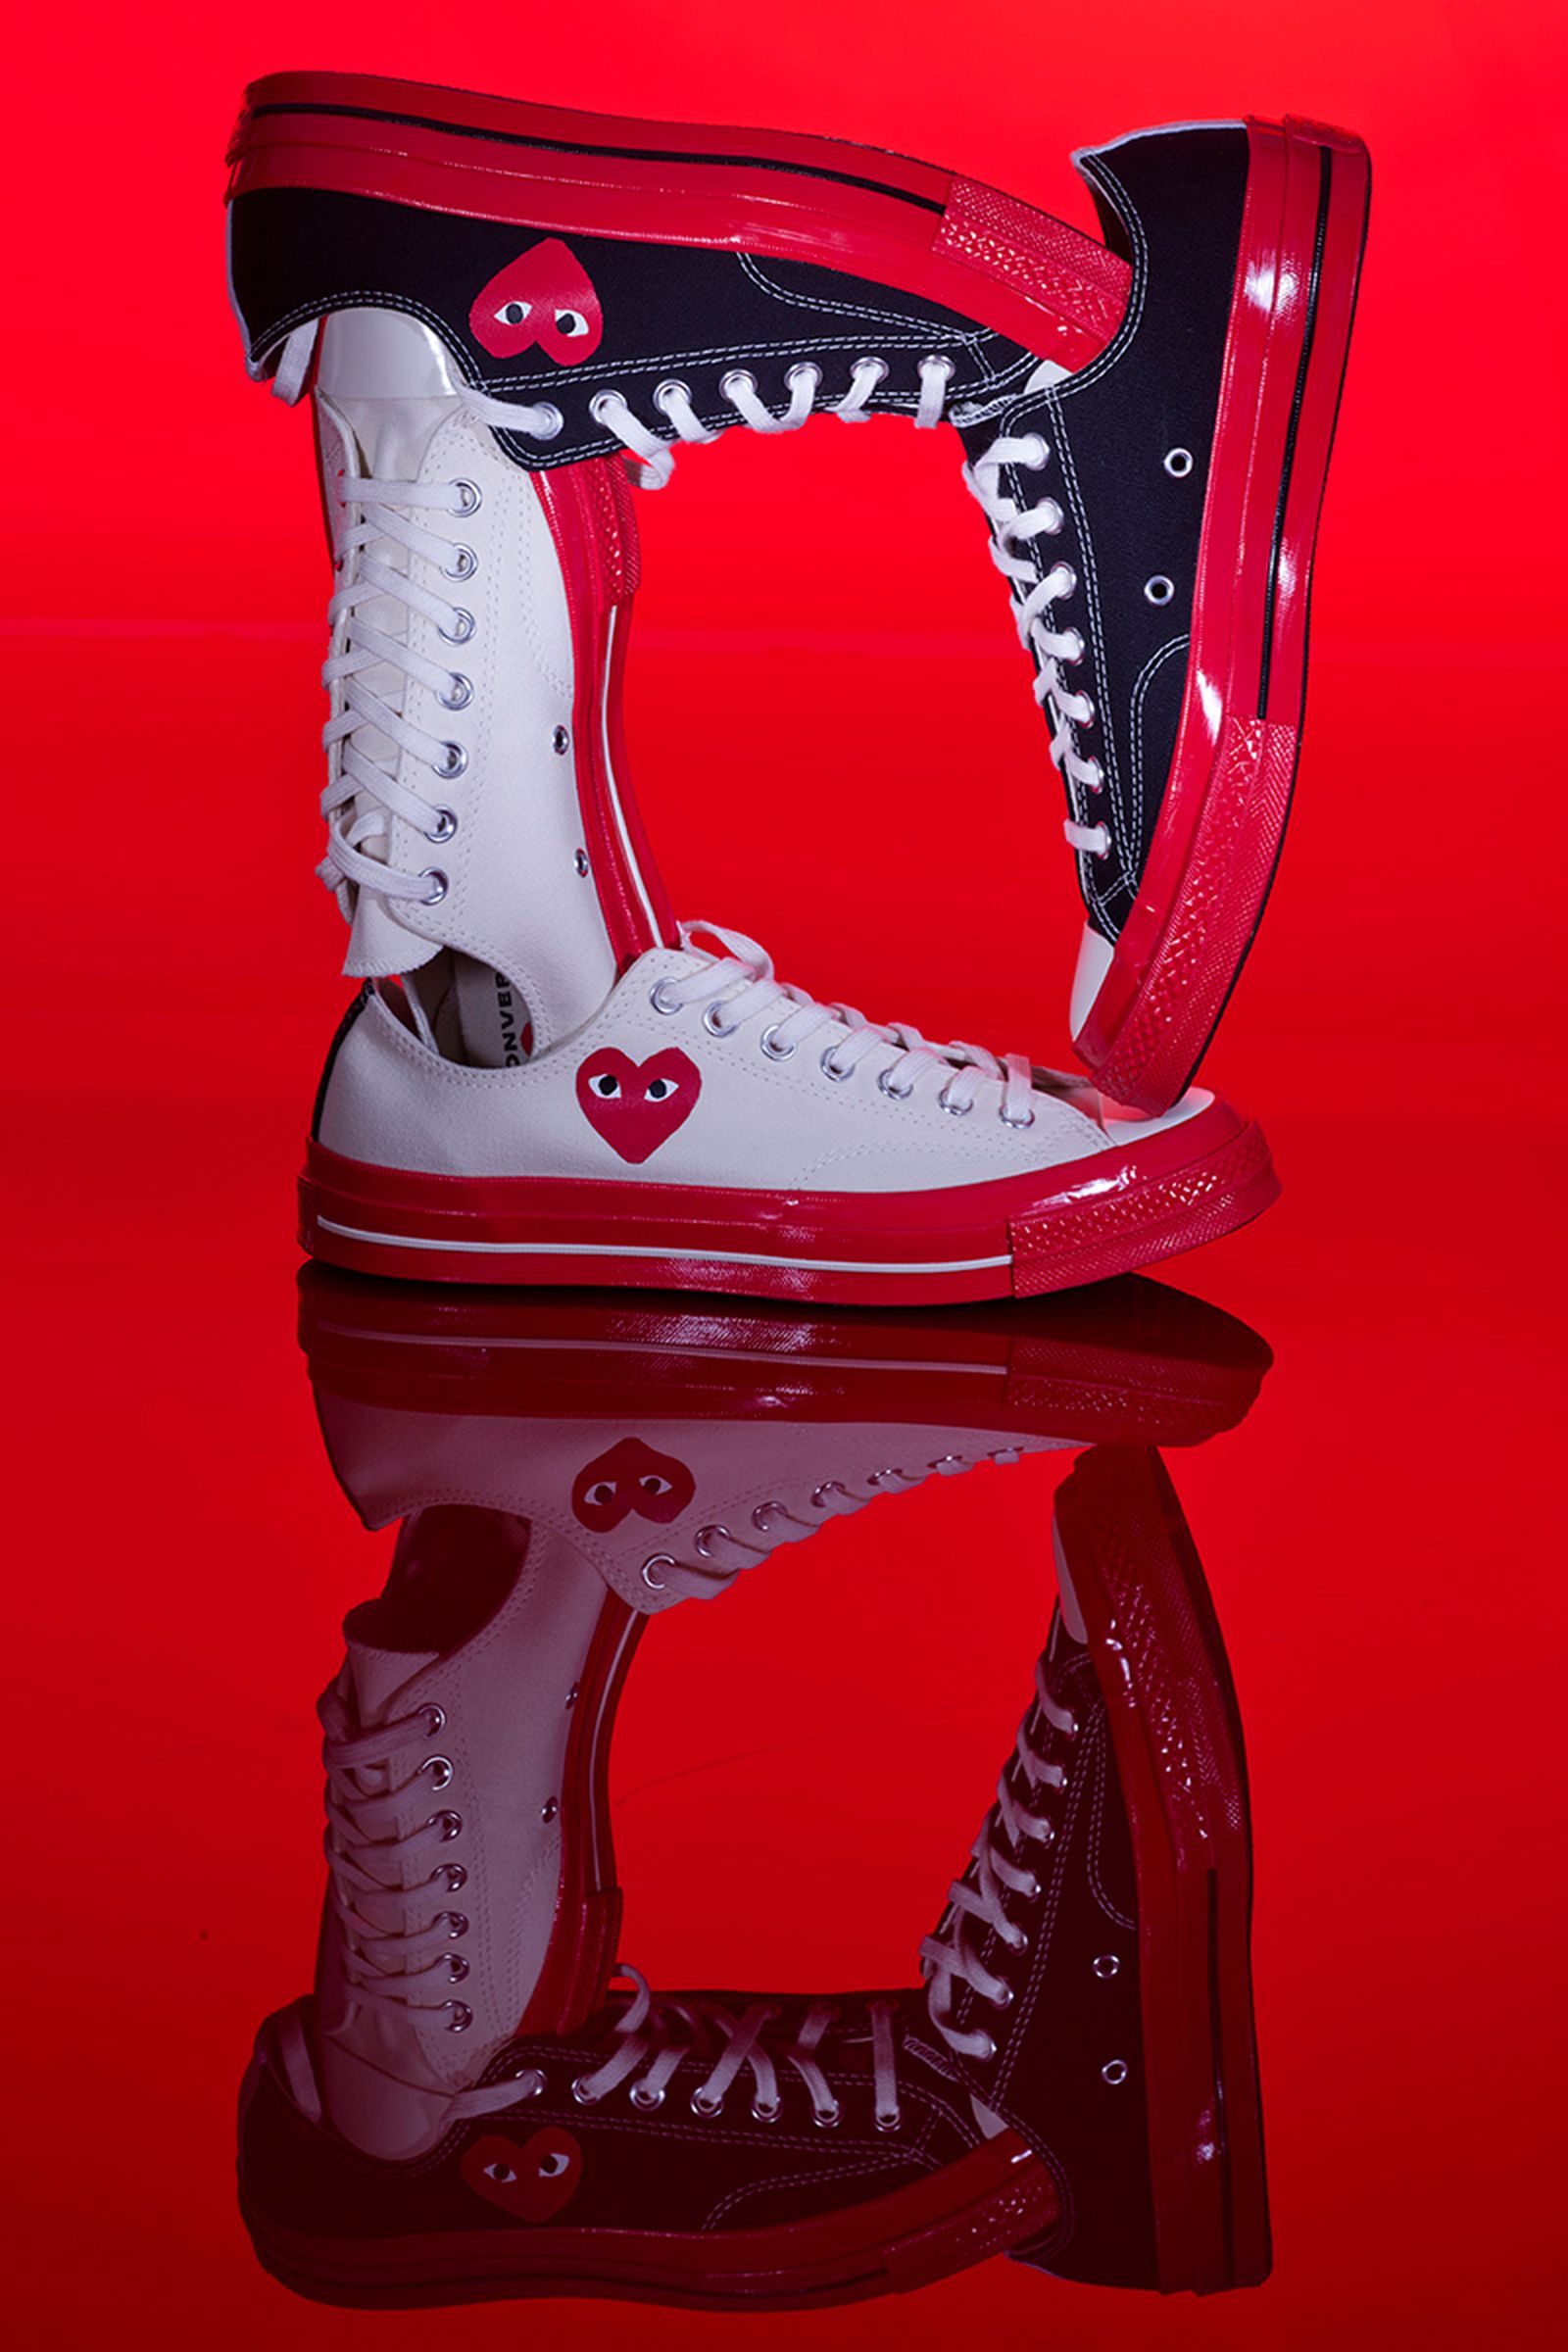 cdg-play-converse-chuck-70-red-release-date-price-3